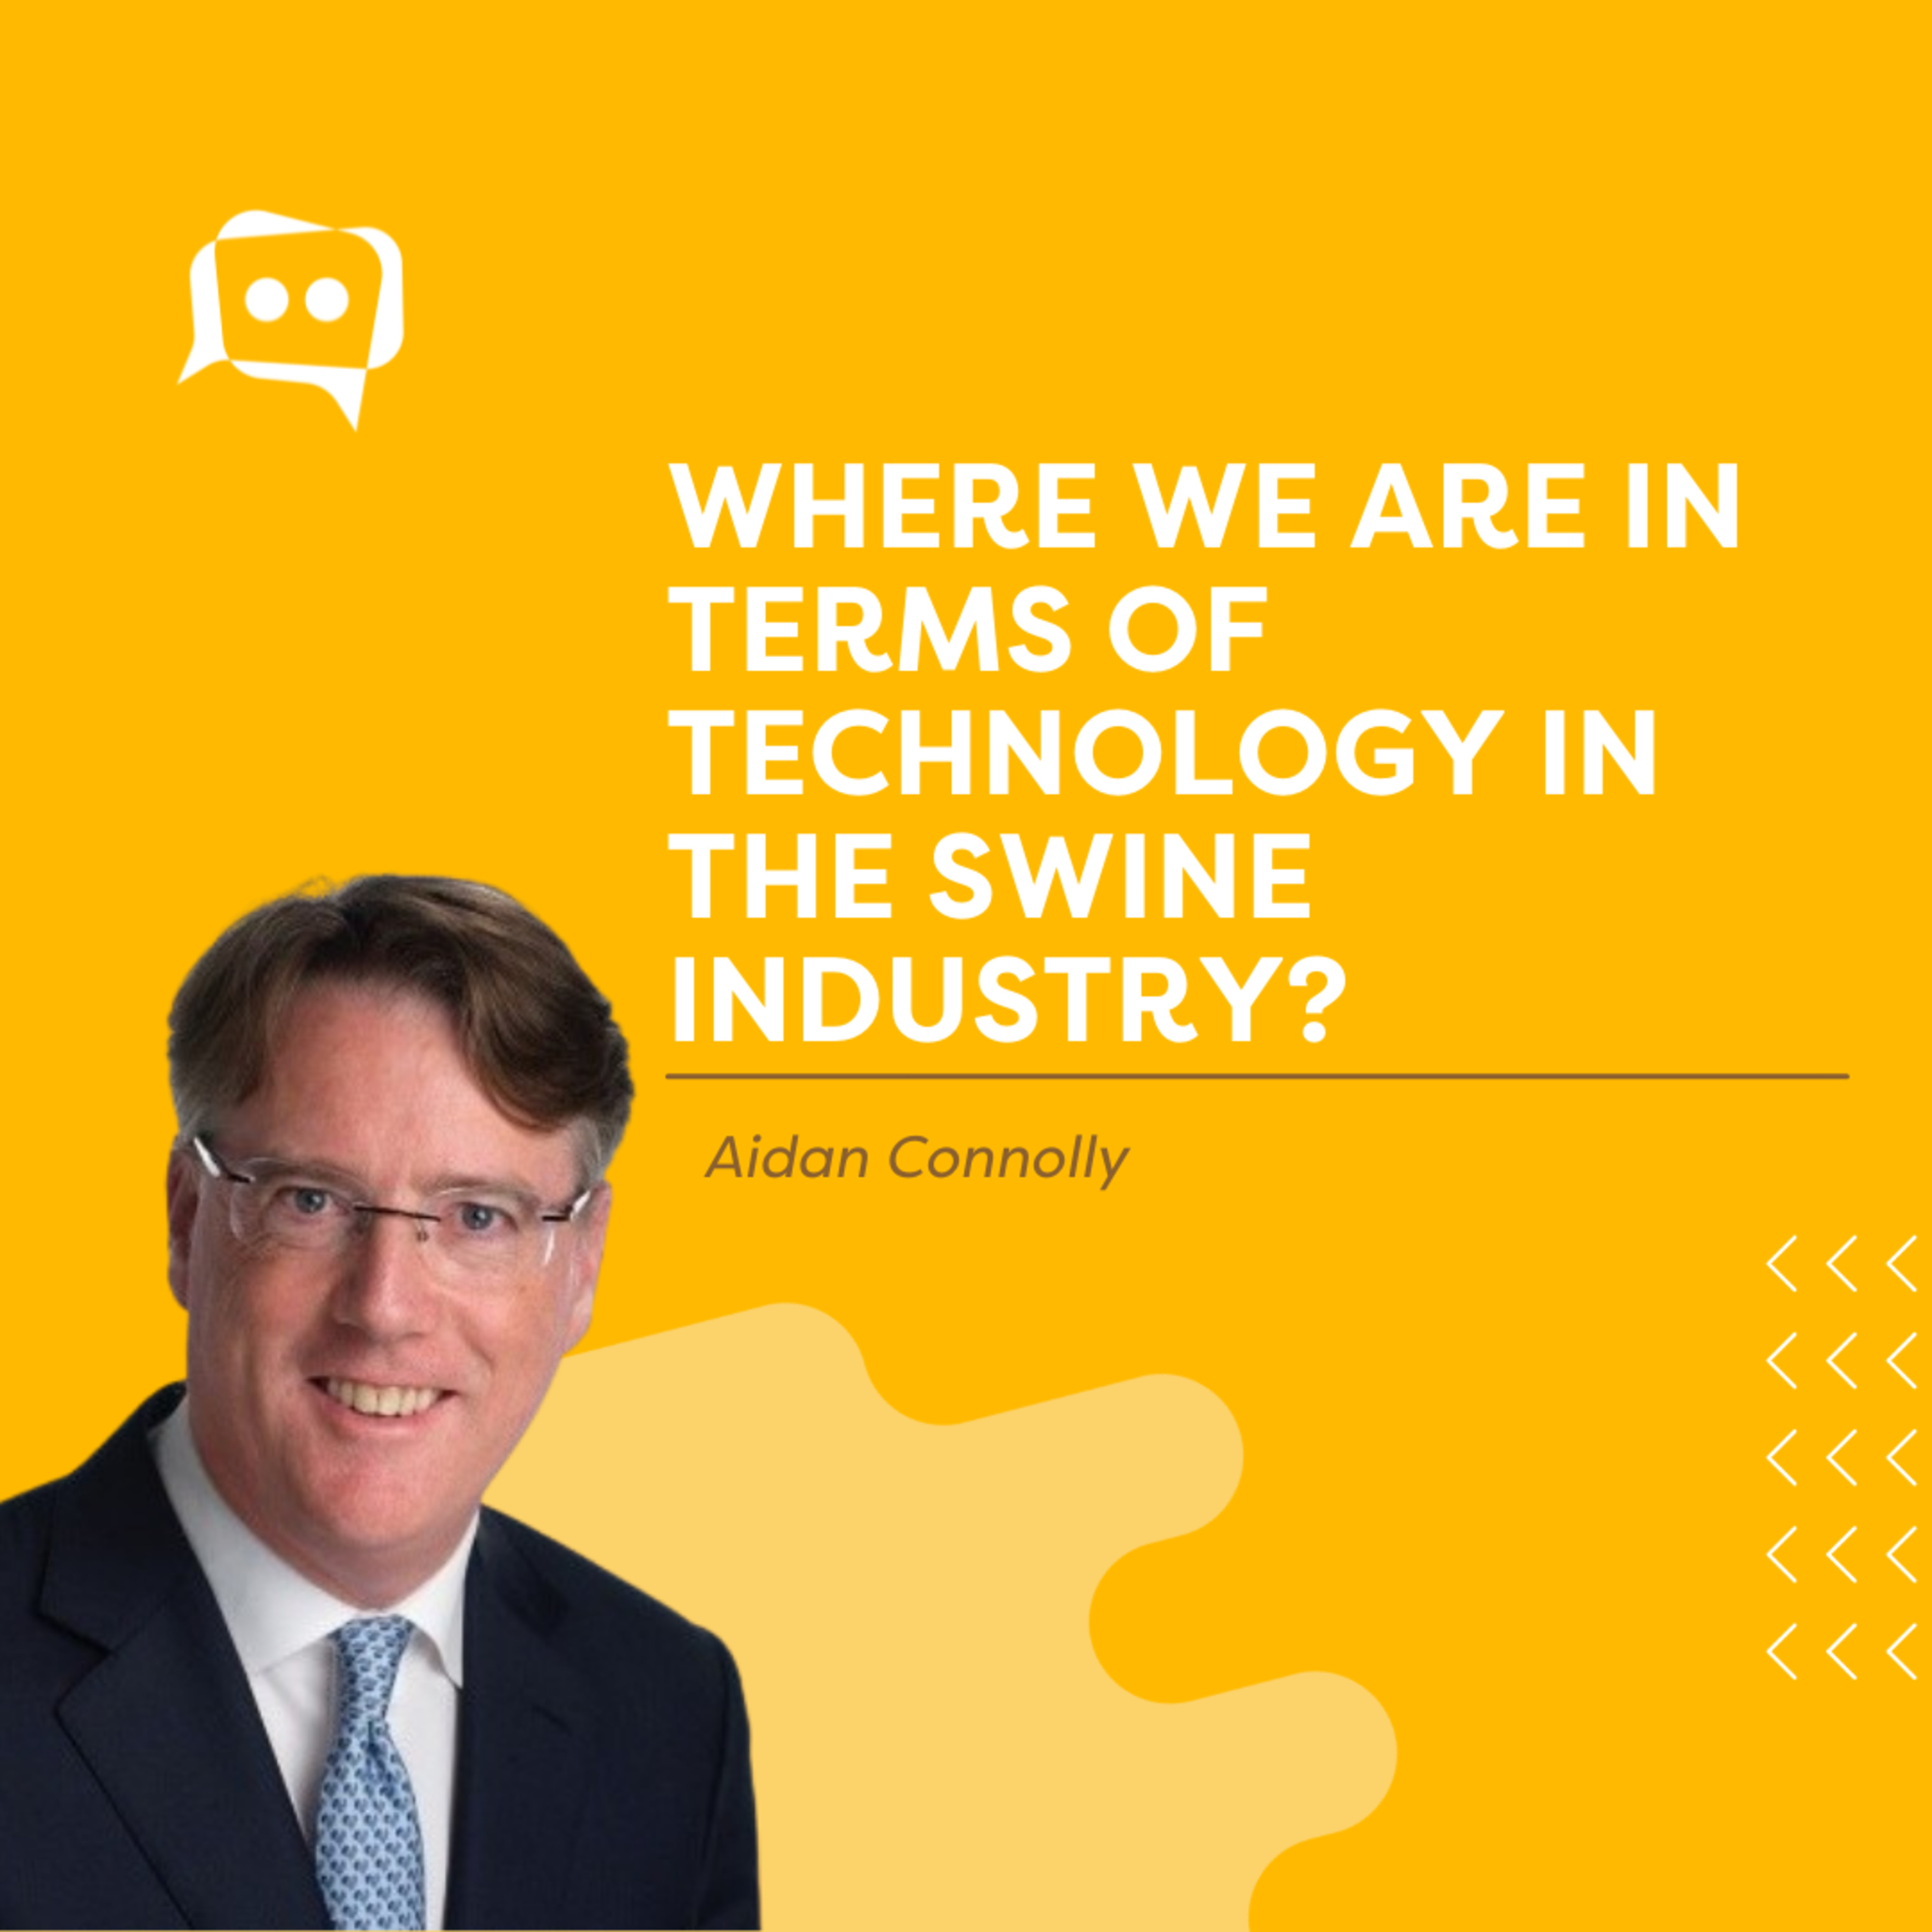 #SHORTS: Where we are in terms of technology in the swine industry? With Aidan Connolly